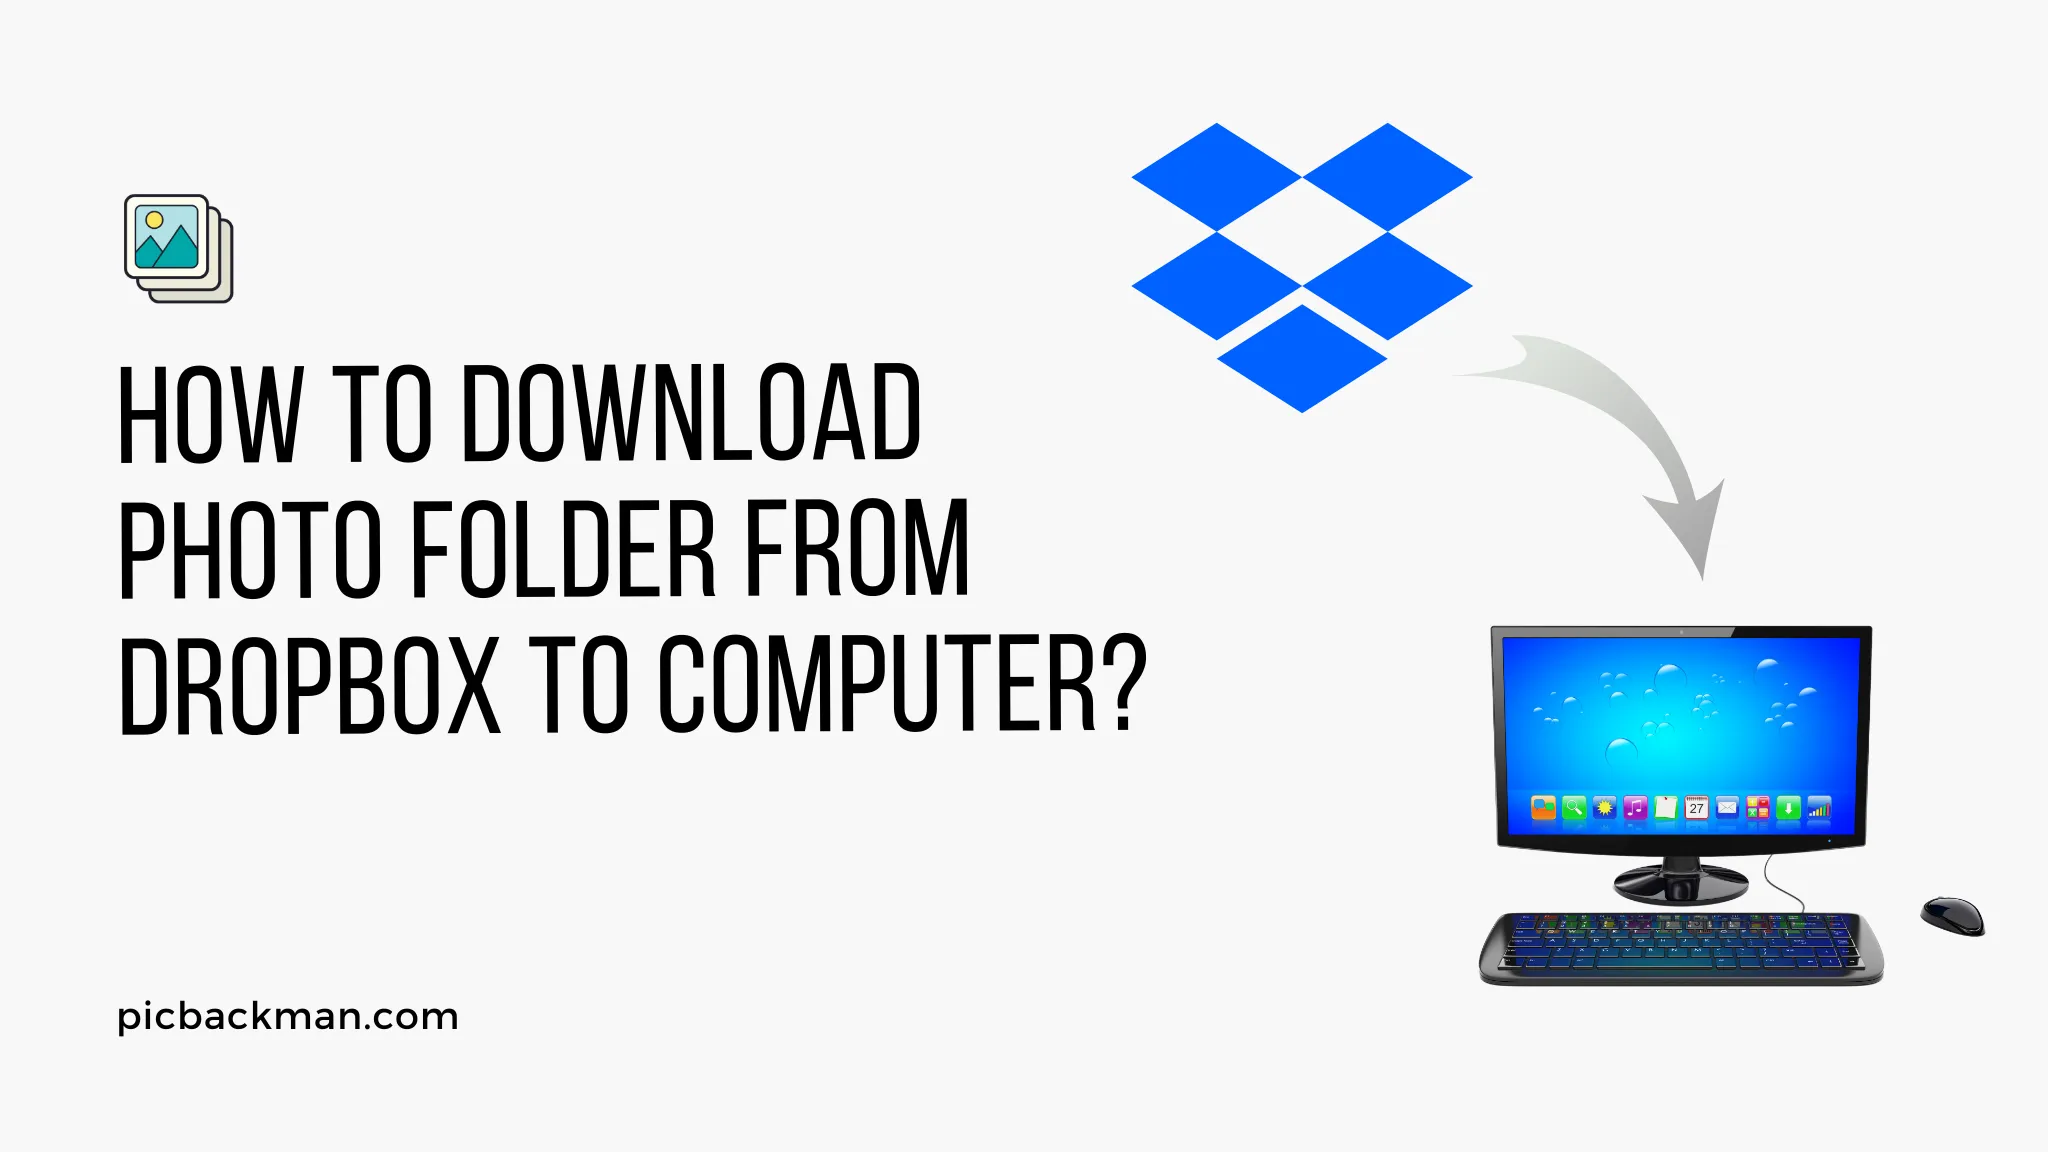 How to download photo folder from DropBox to computer